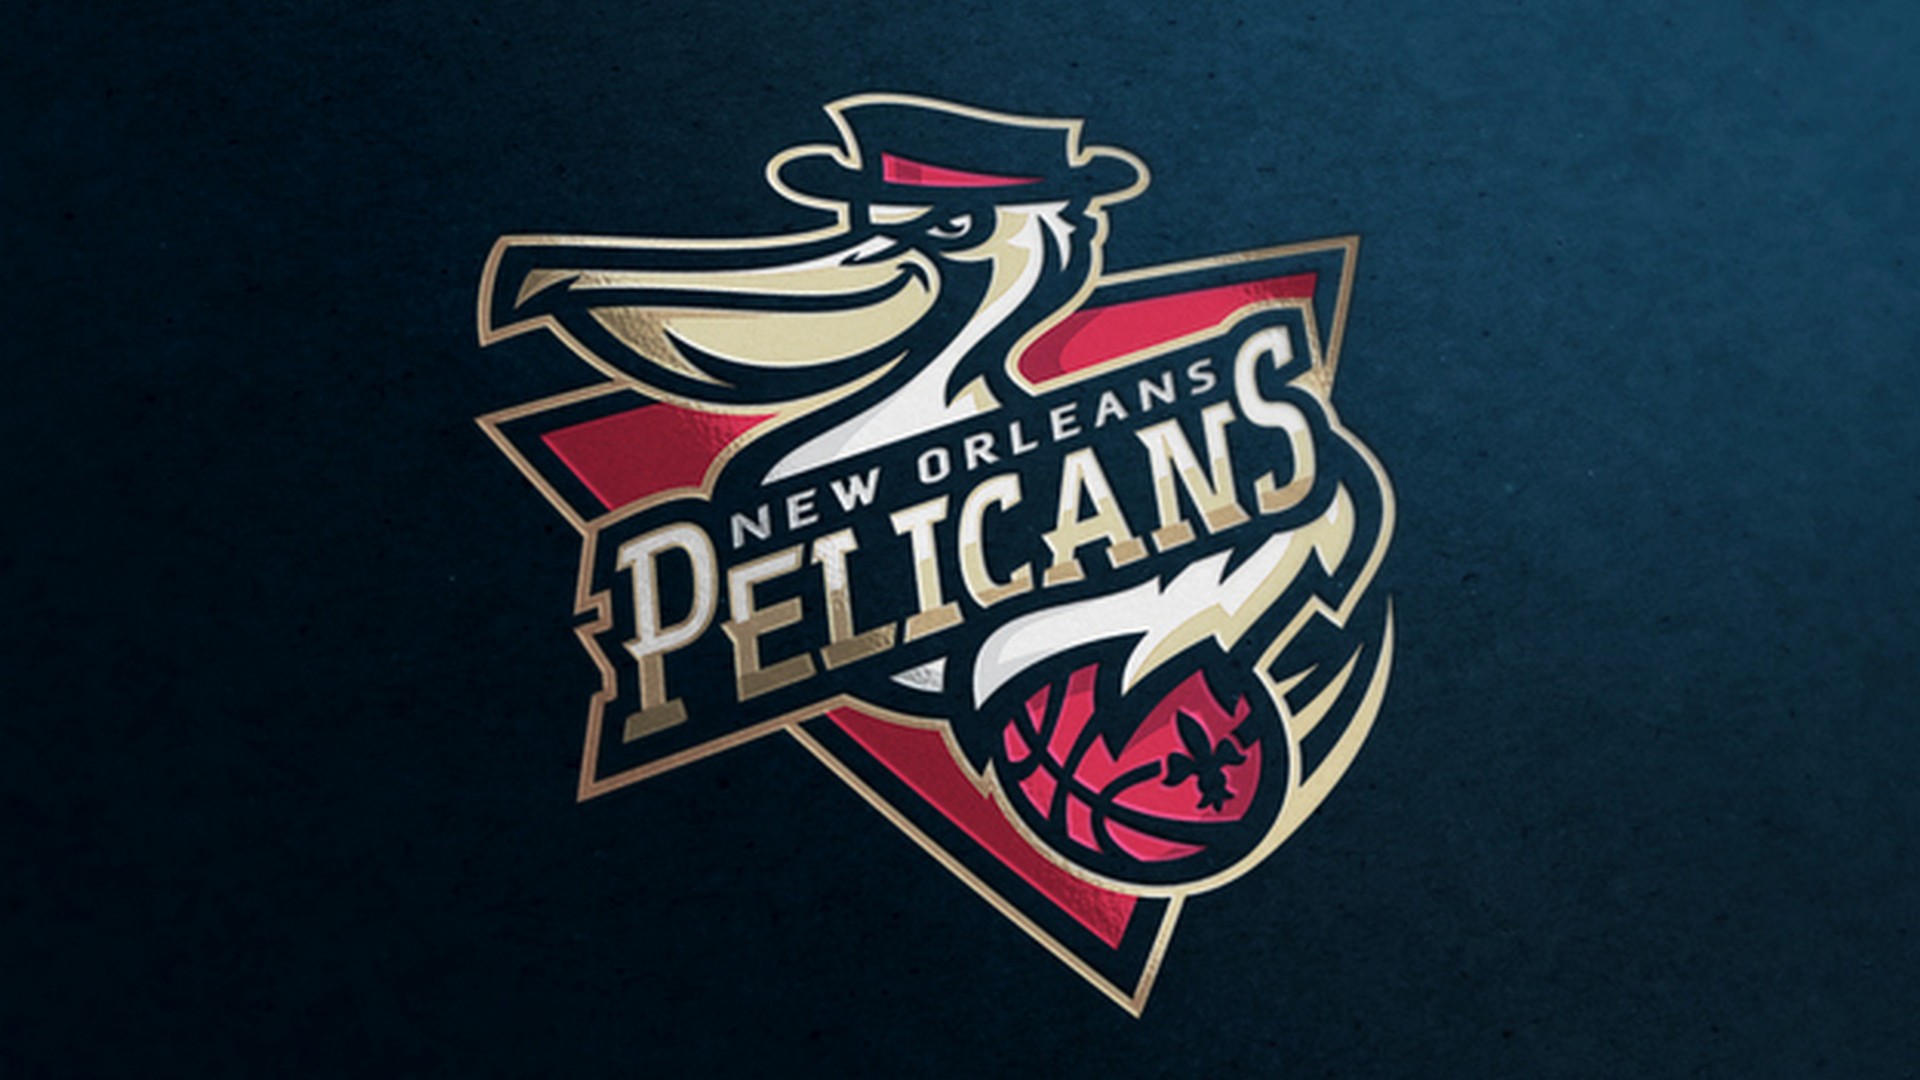 New Orleans Pelicans For Pc Wallpaper With High-resolution - New Orleans Pelicans - HD Wallpaper 